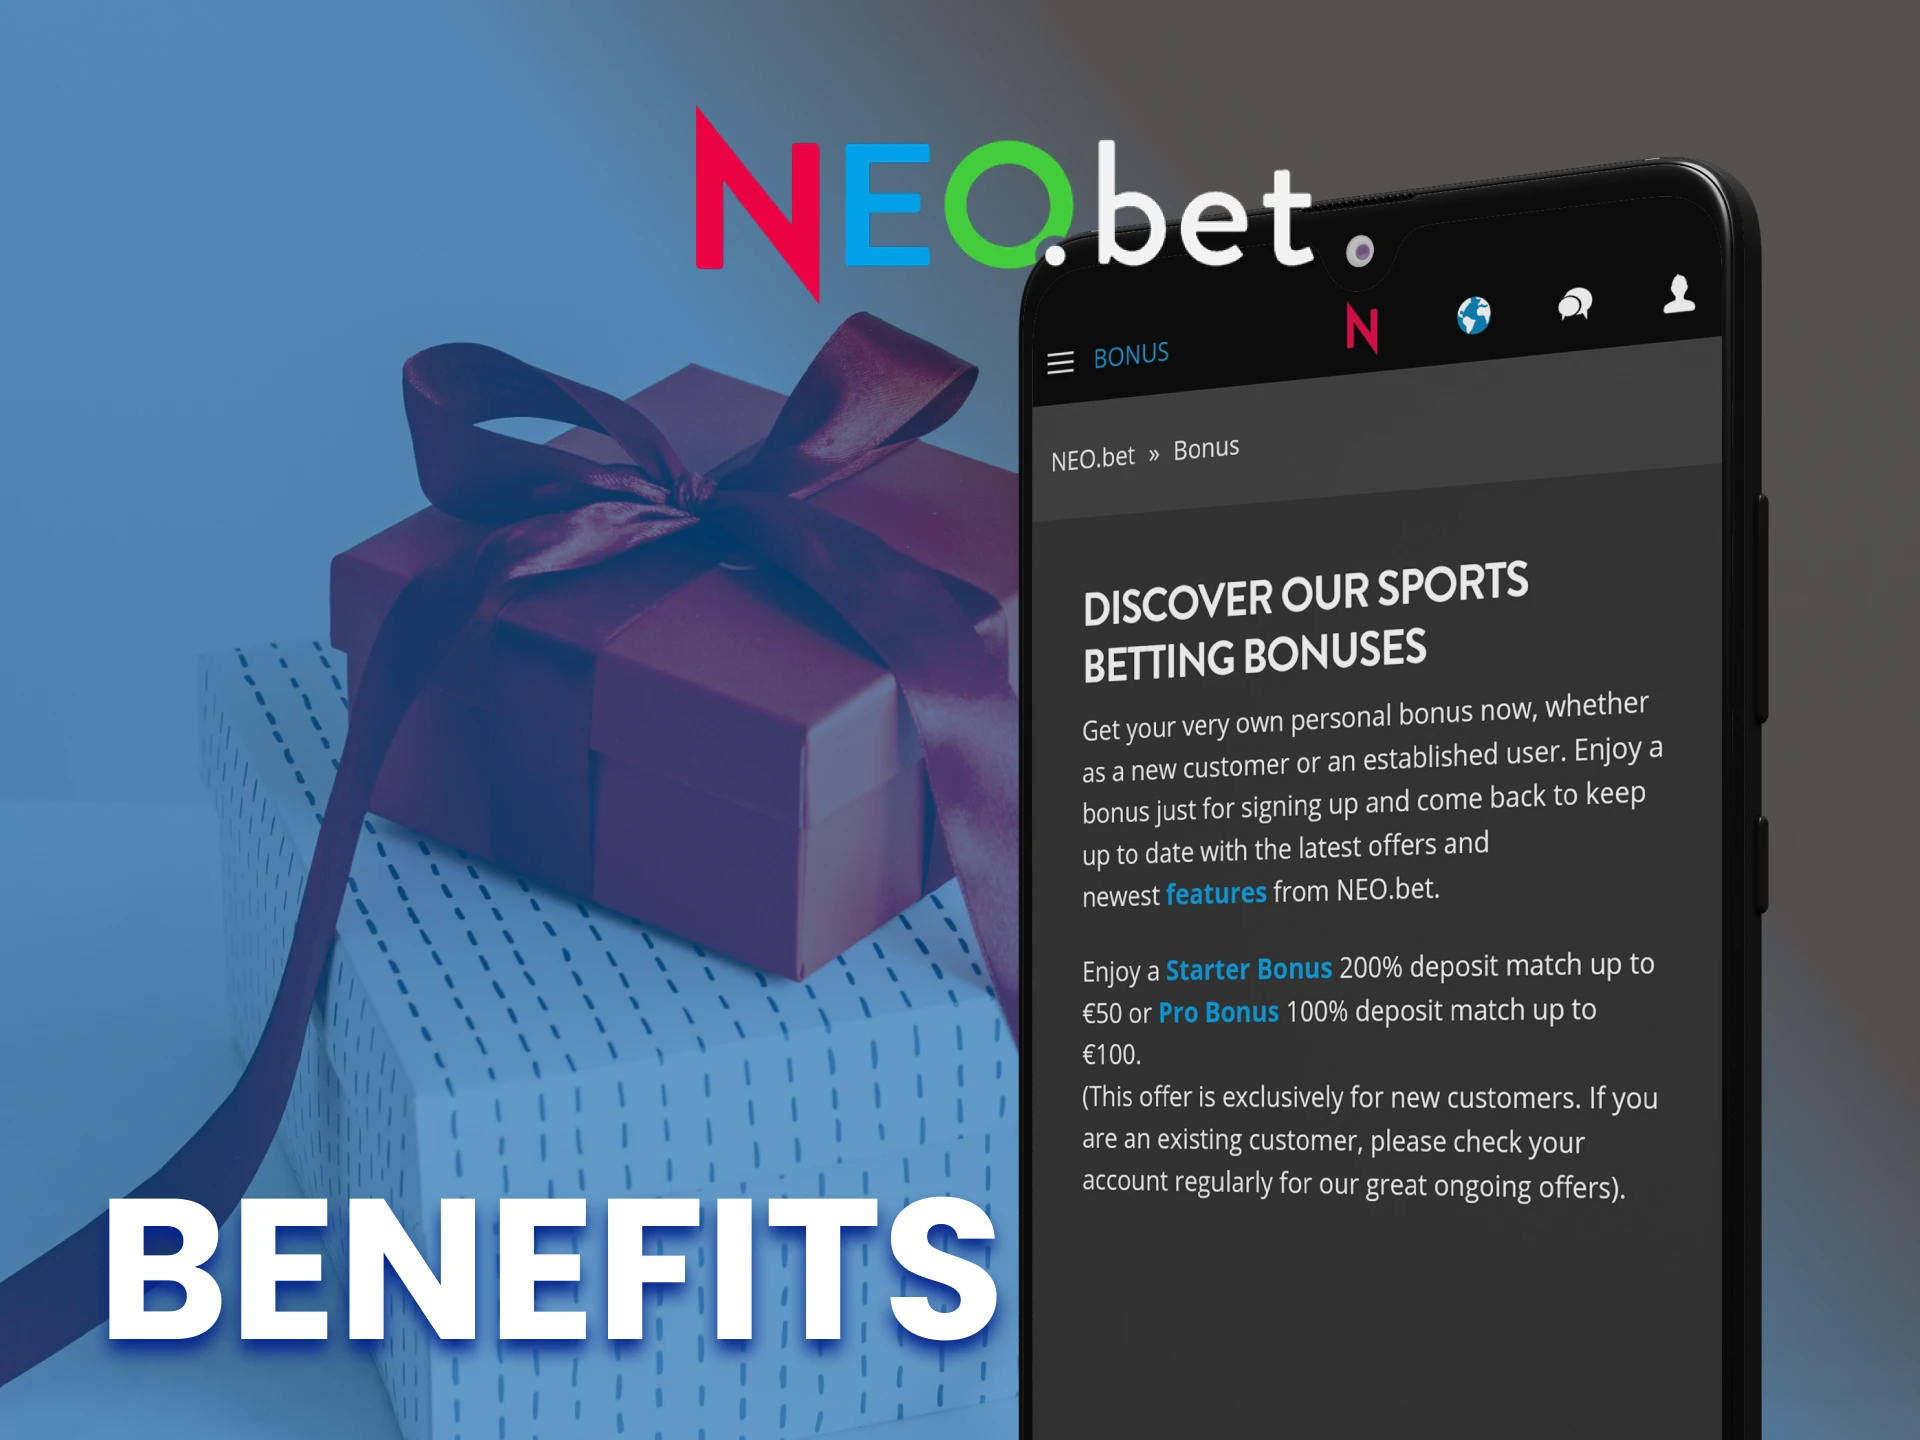 he NEO.bet app has many bonuses and benefits for players.